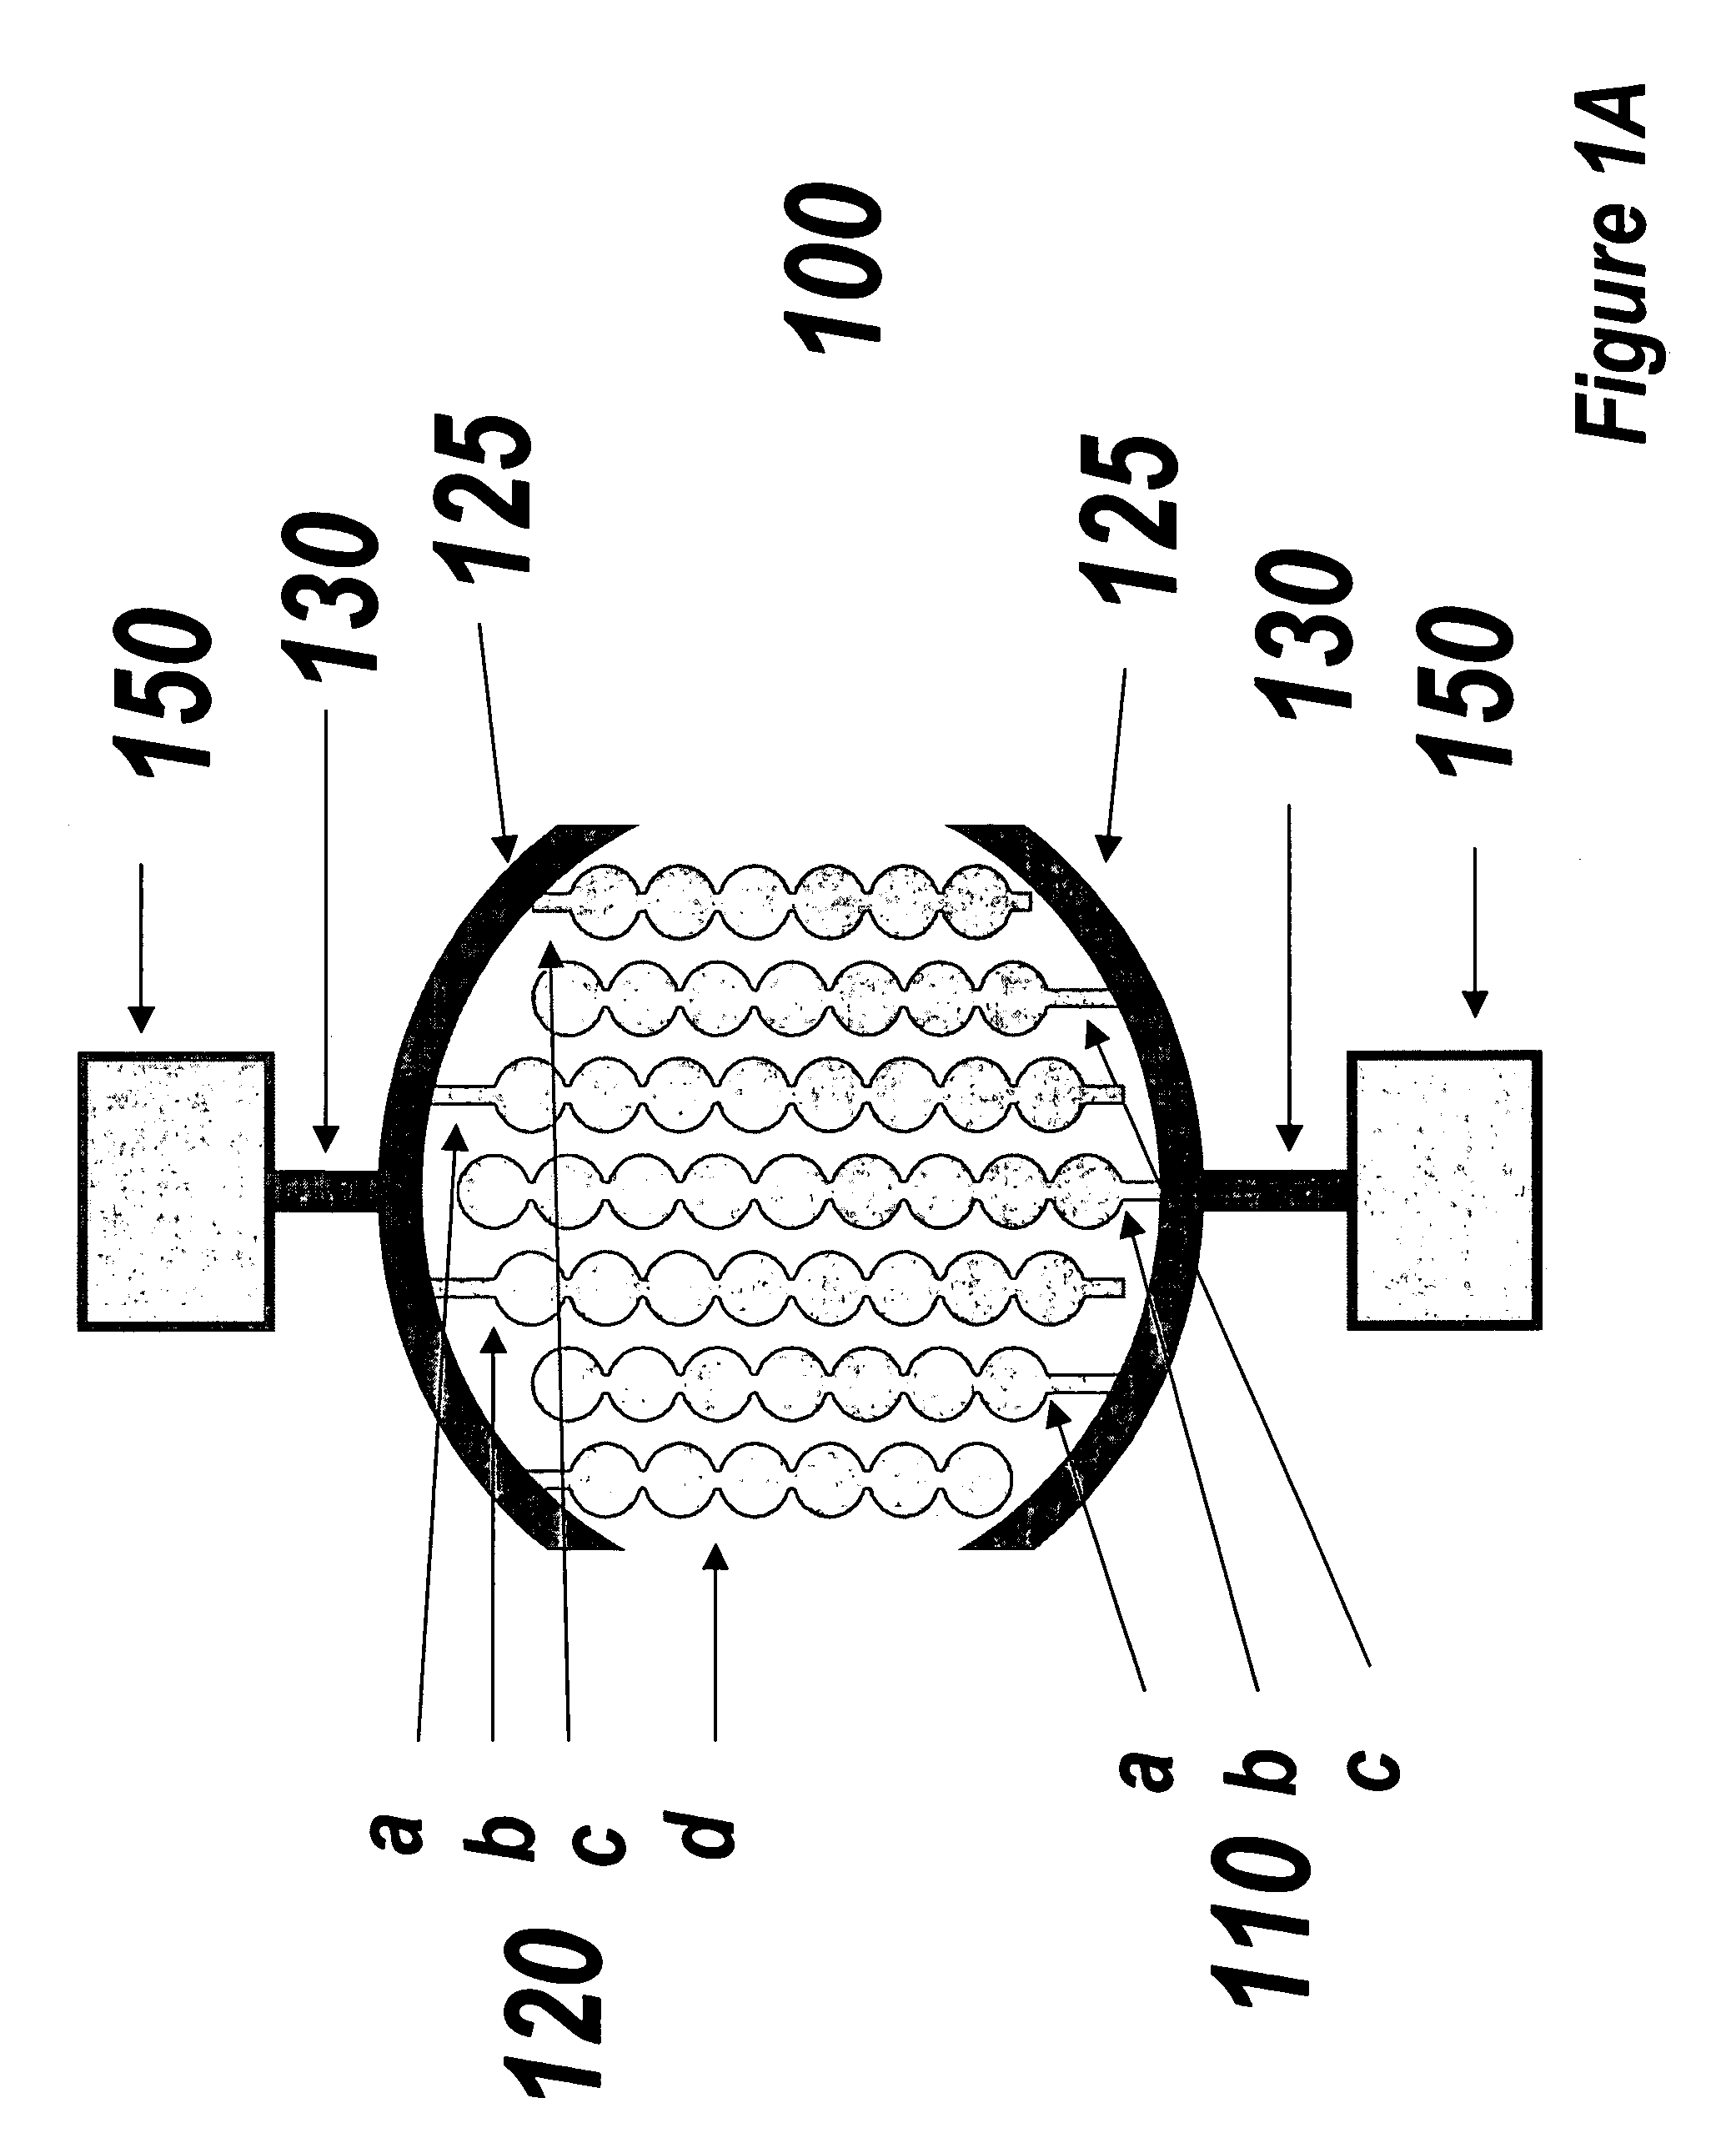 Impedance based devices and methods for use in assays